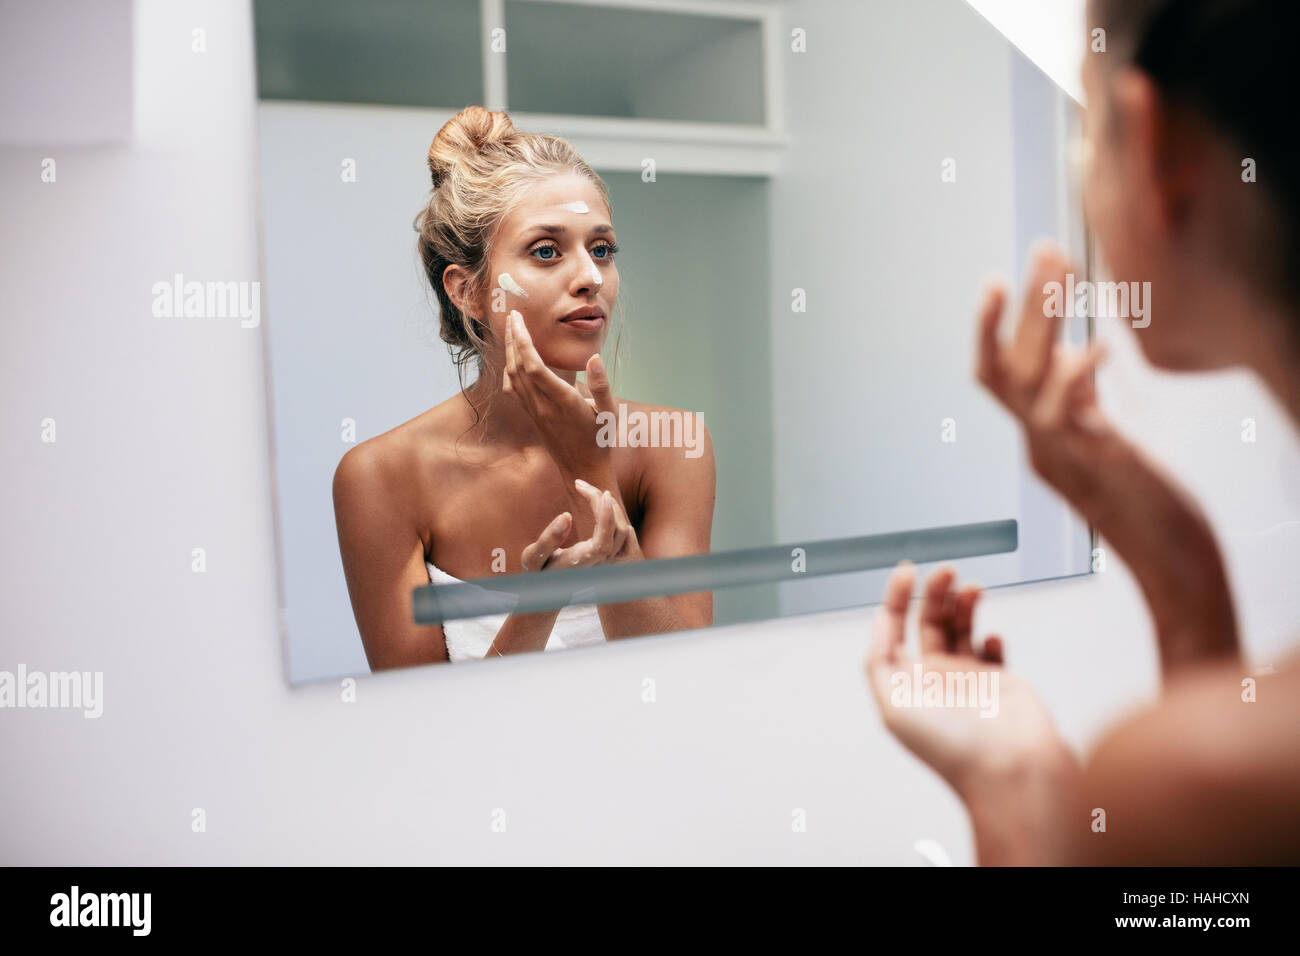 Beautiful young woman applying cream in bathroom. Female looking into the bathroom mirror and putting on face cream. Stock Photo